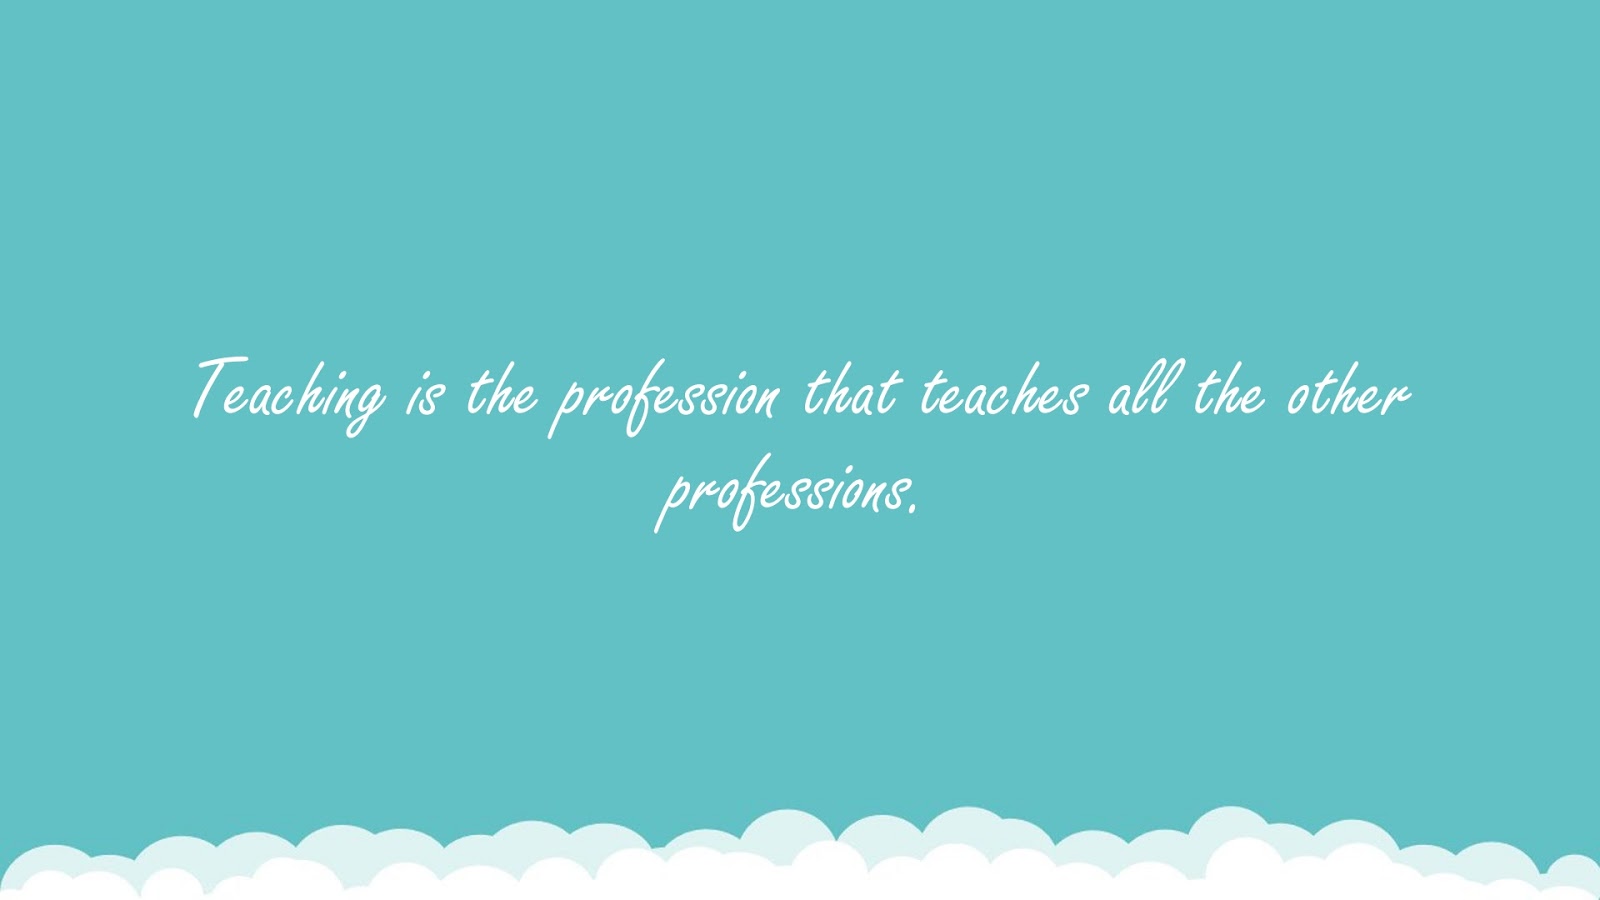 Teaching is the profession that teaches all the other professions.FALSE